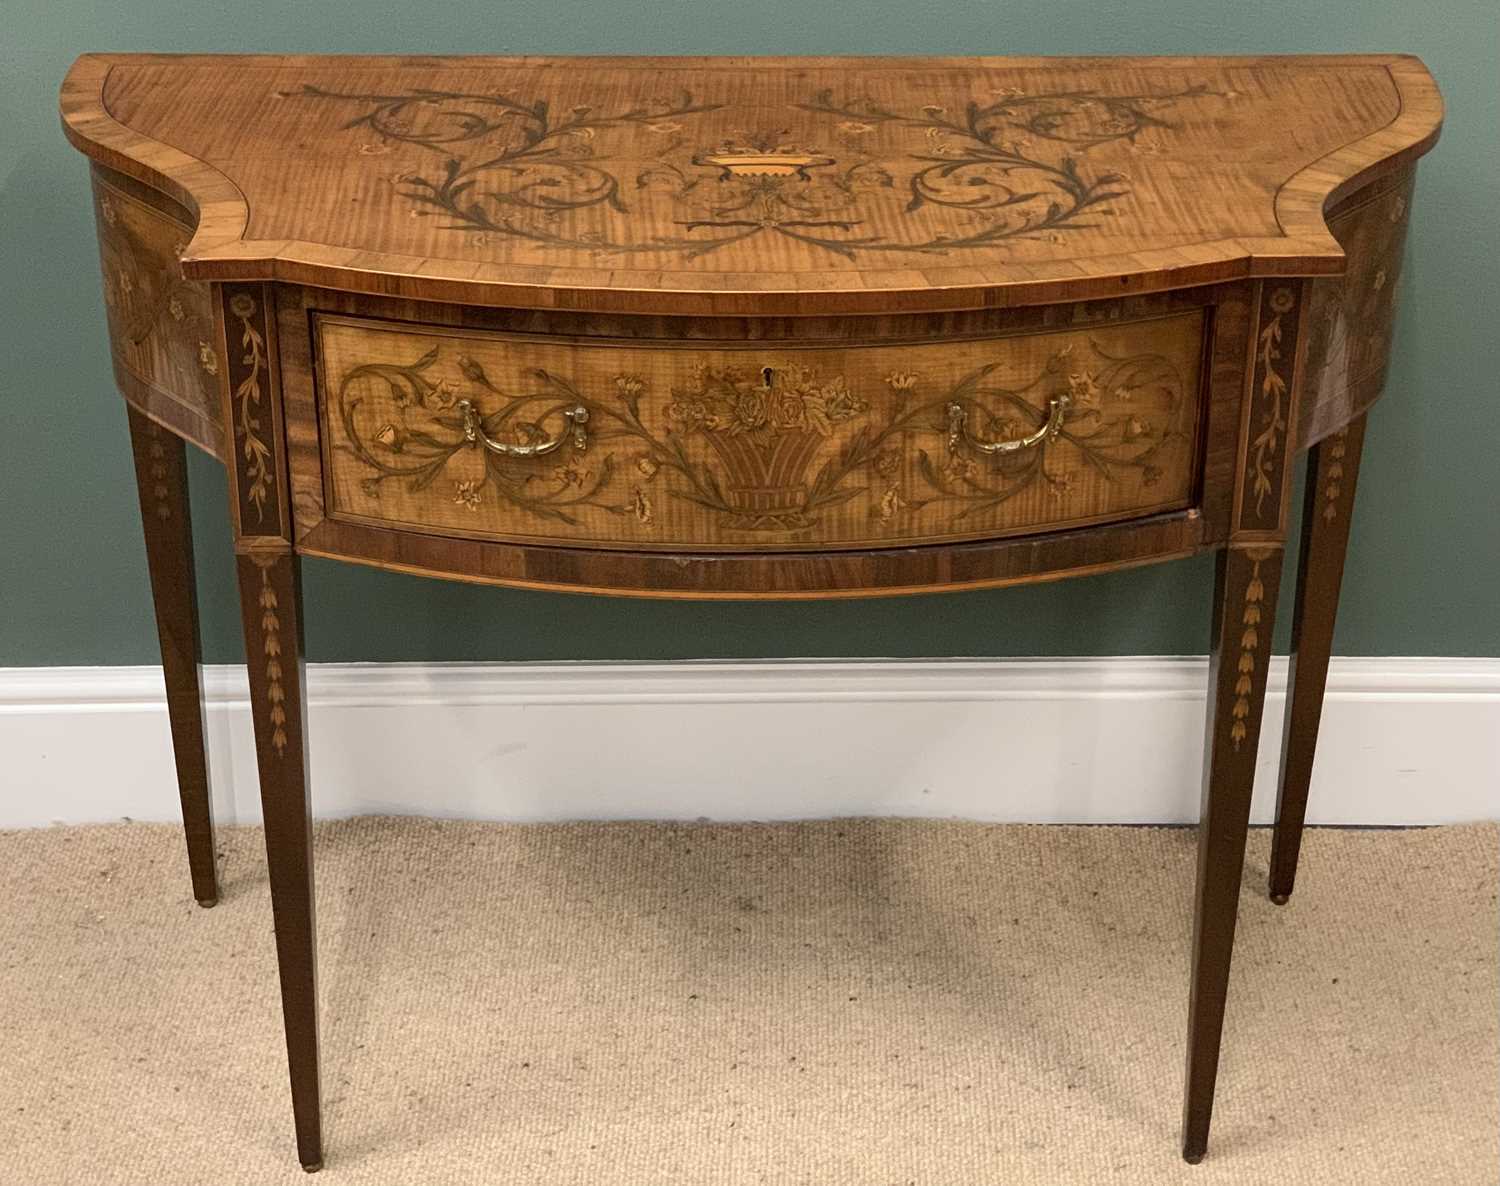 FRENCH SATINWOOD URN & FLORAL INLAID SIDE TABLE having a shaped top and single central drawer on